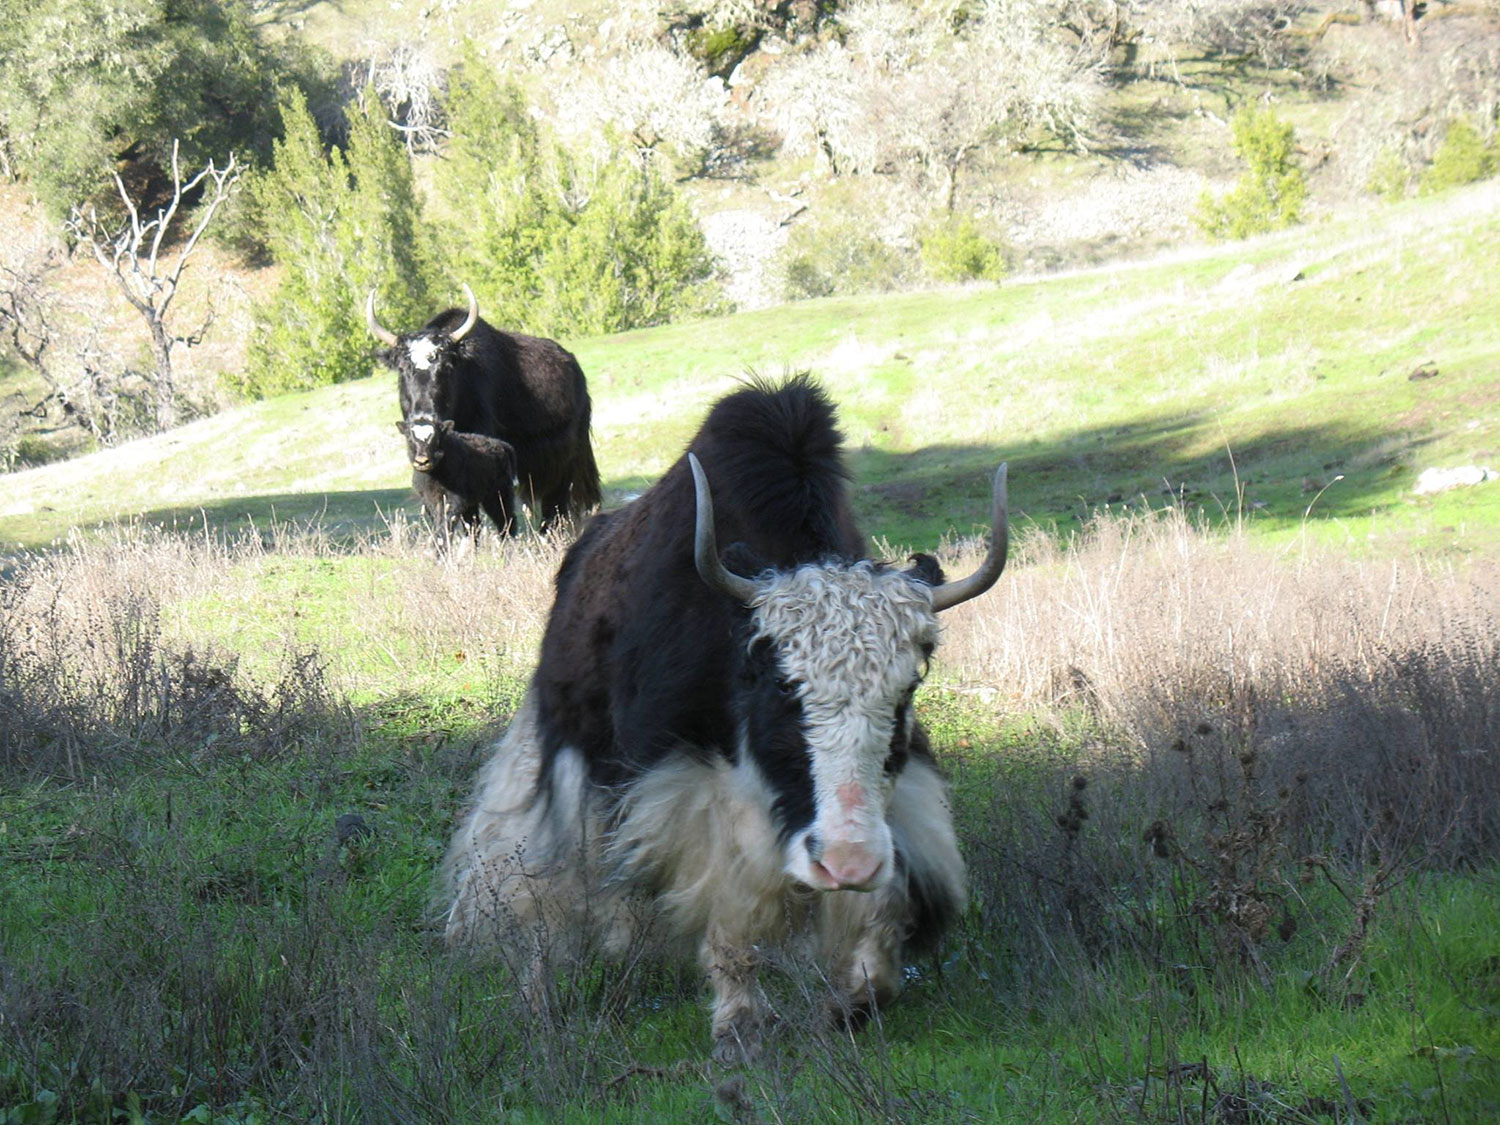 A trio of the yaks chill in the pasture (baby yak with mama in the back)